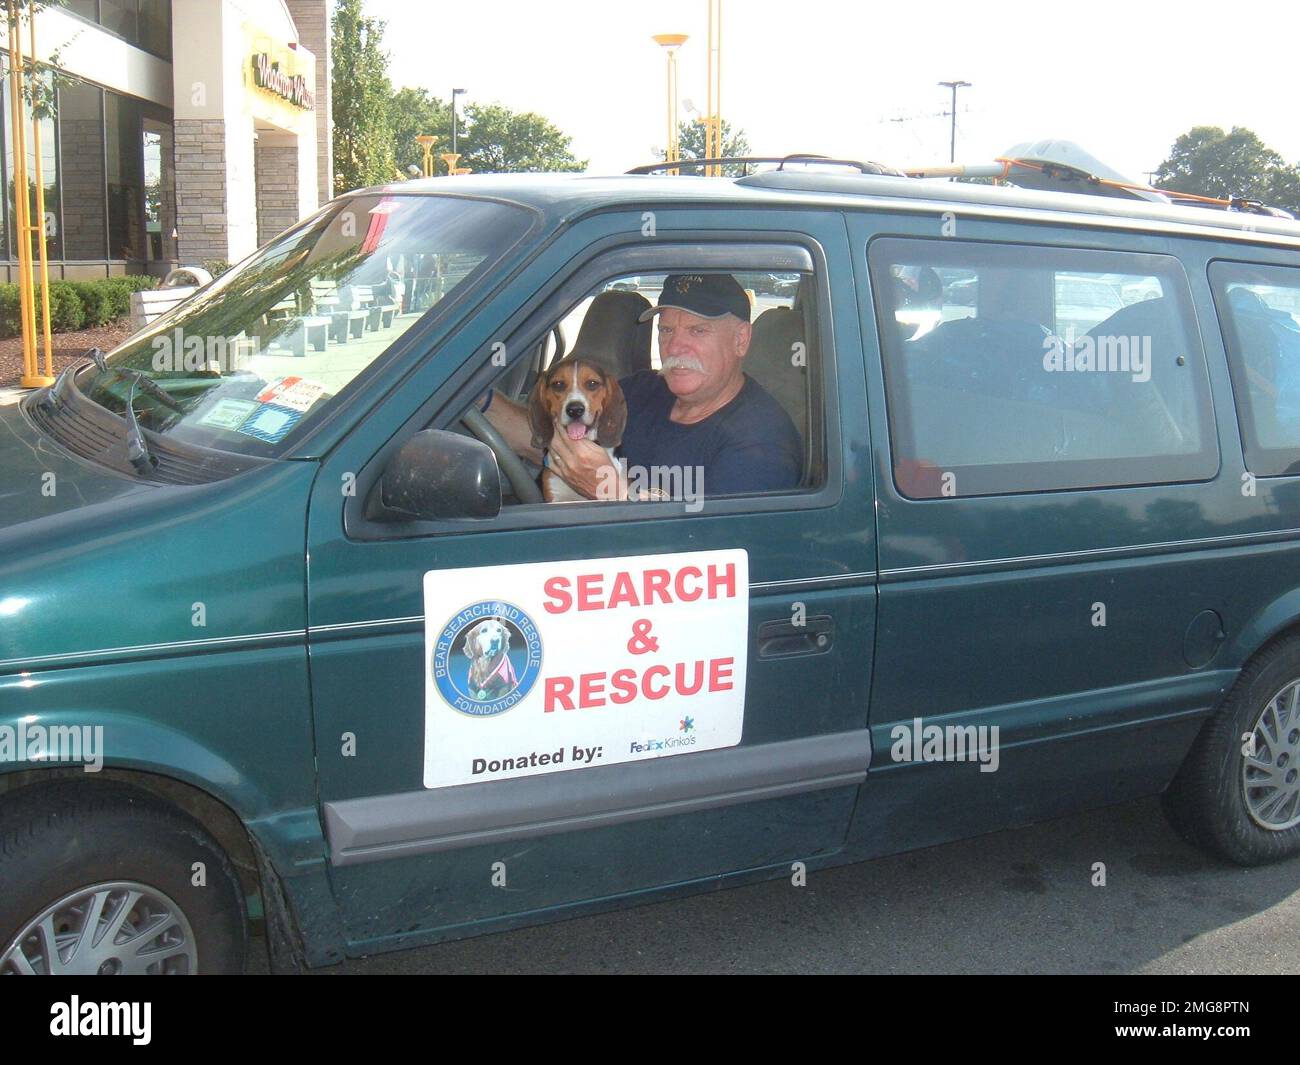 Animals - 26-HK-59-66. personnel inside search-and-rescue vehicle with dog-- 0509 16. Hurricane Katrina Stock Photo